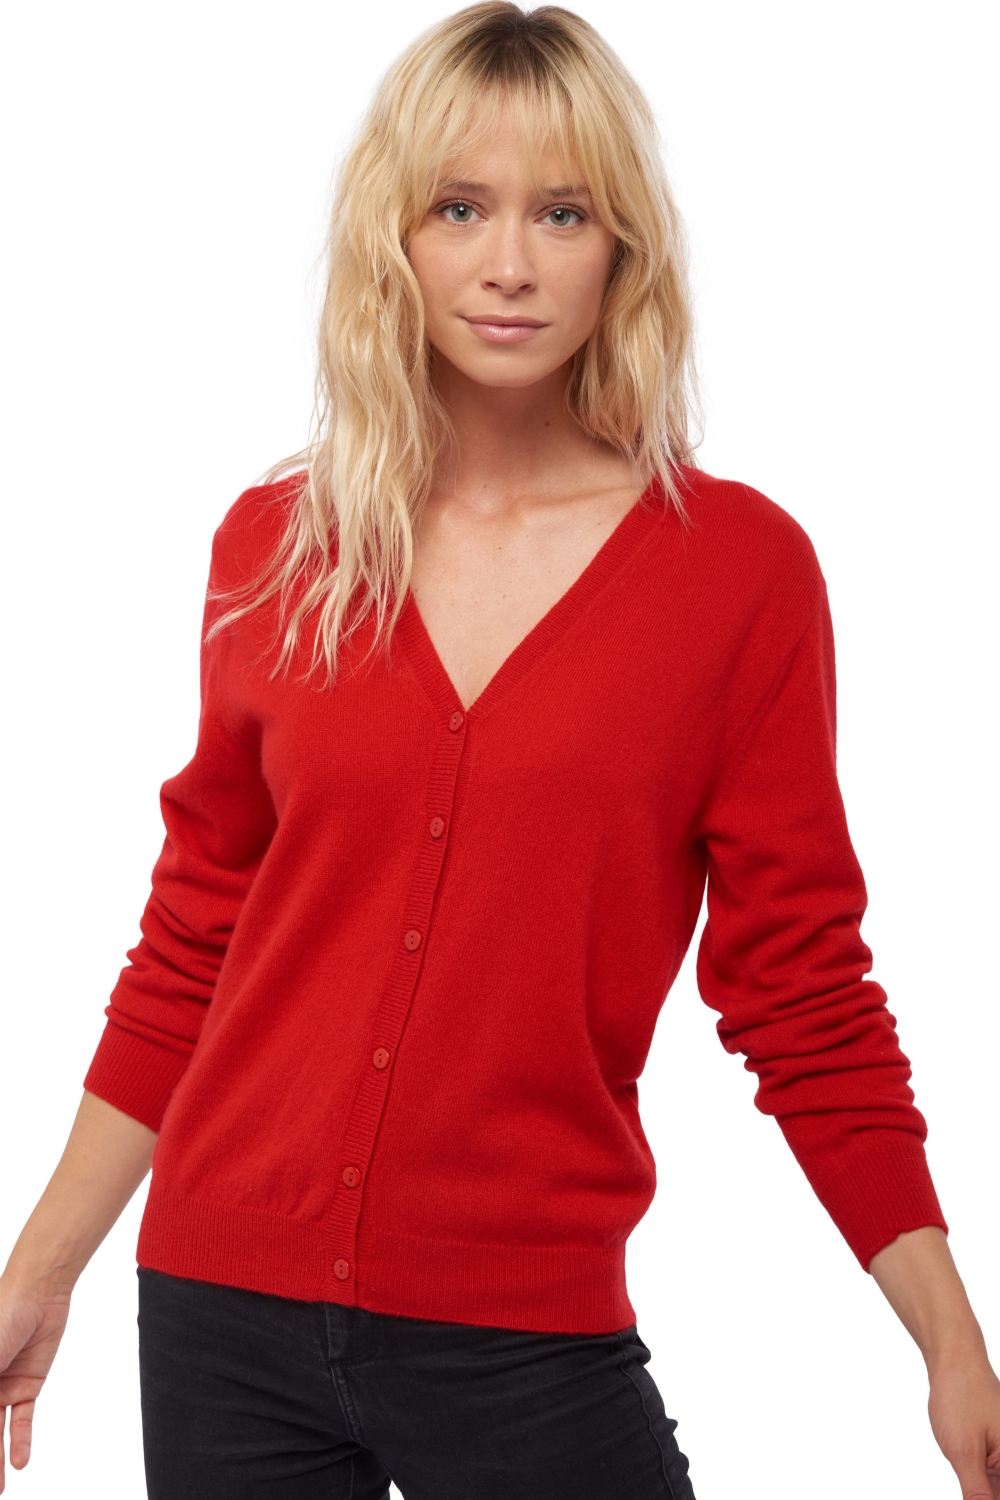 Cachemire pull femme collection printemps ete taline first chilli red m